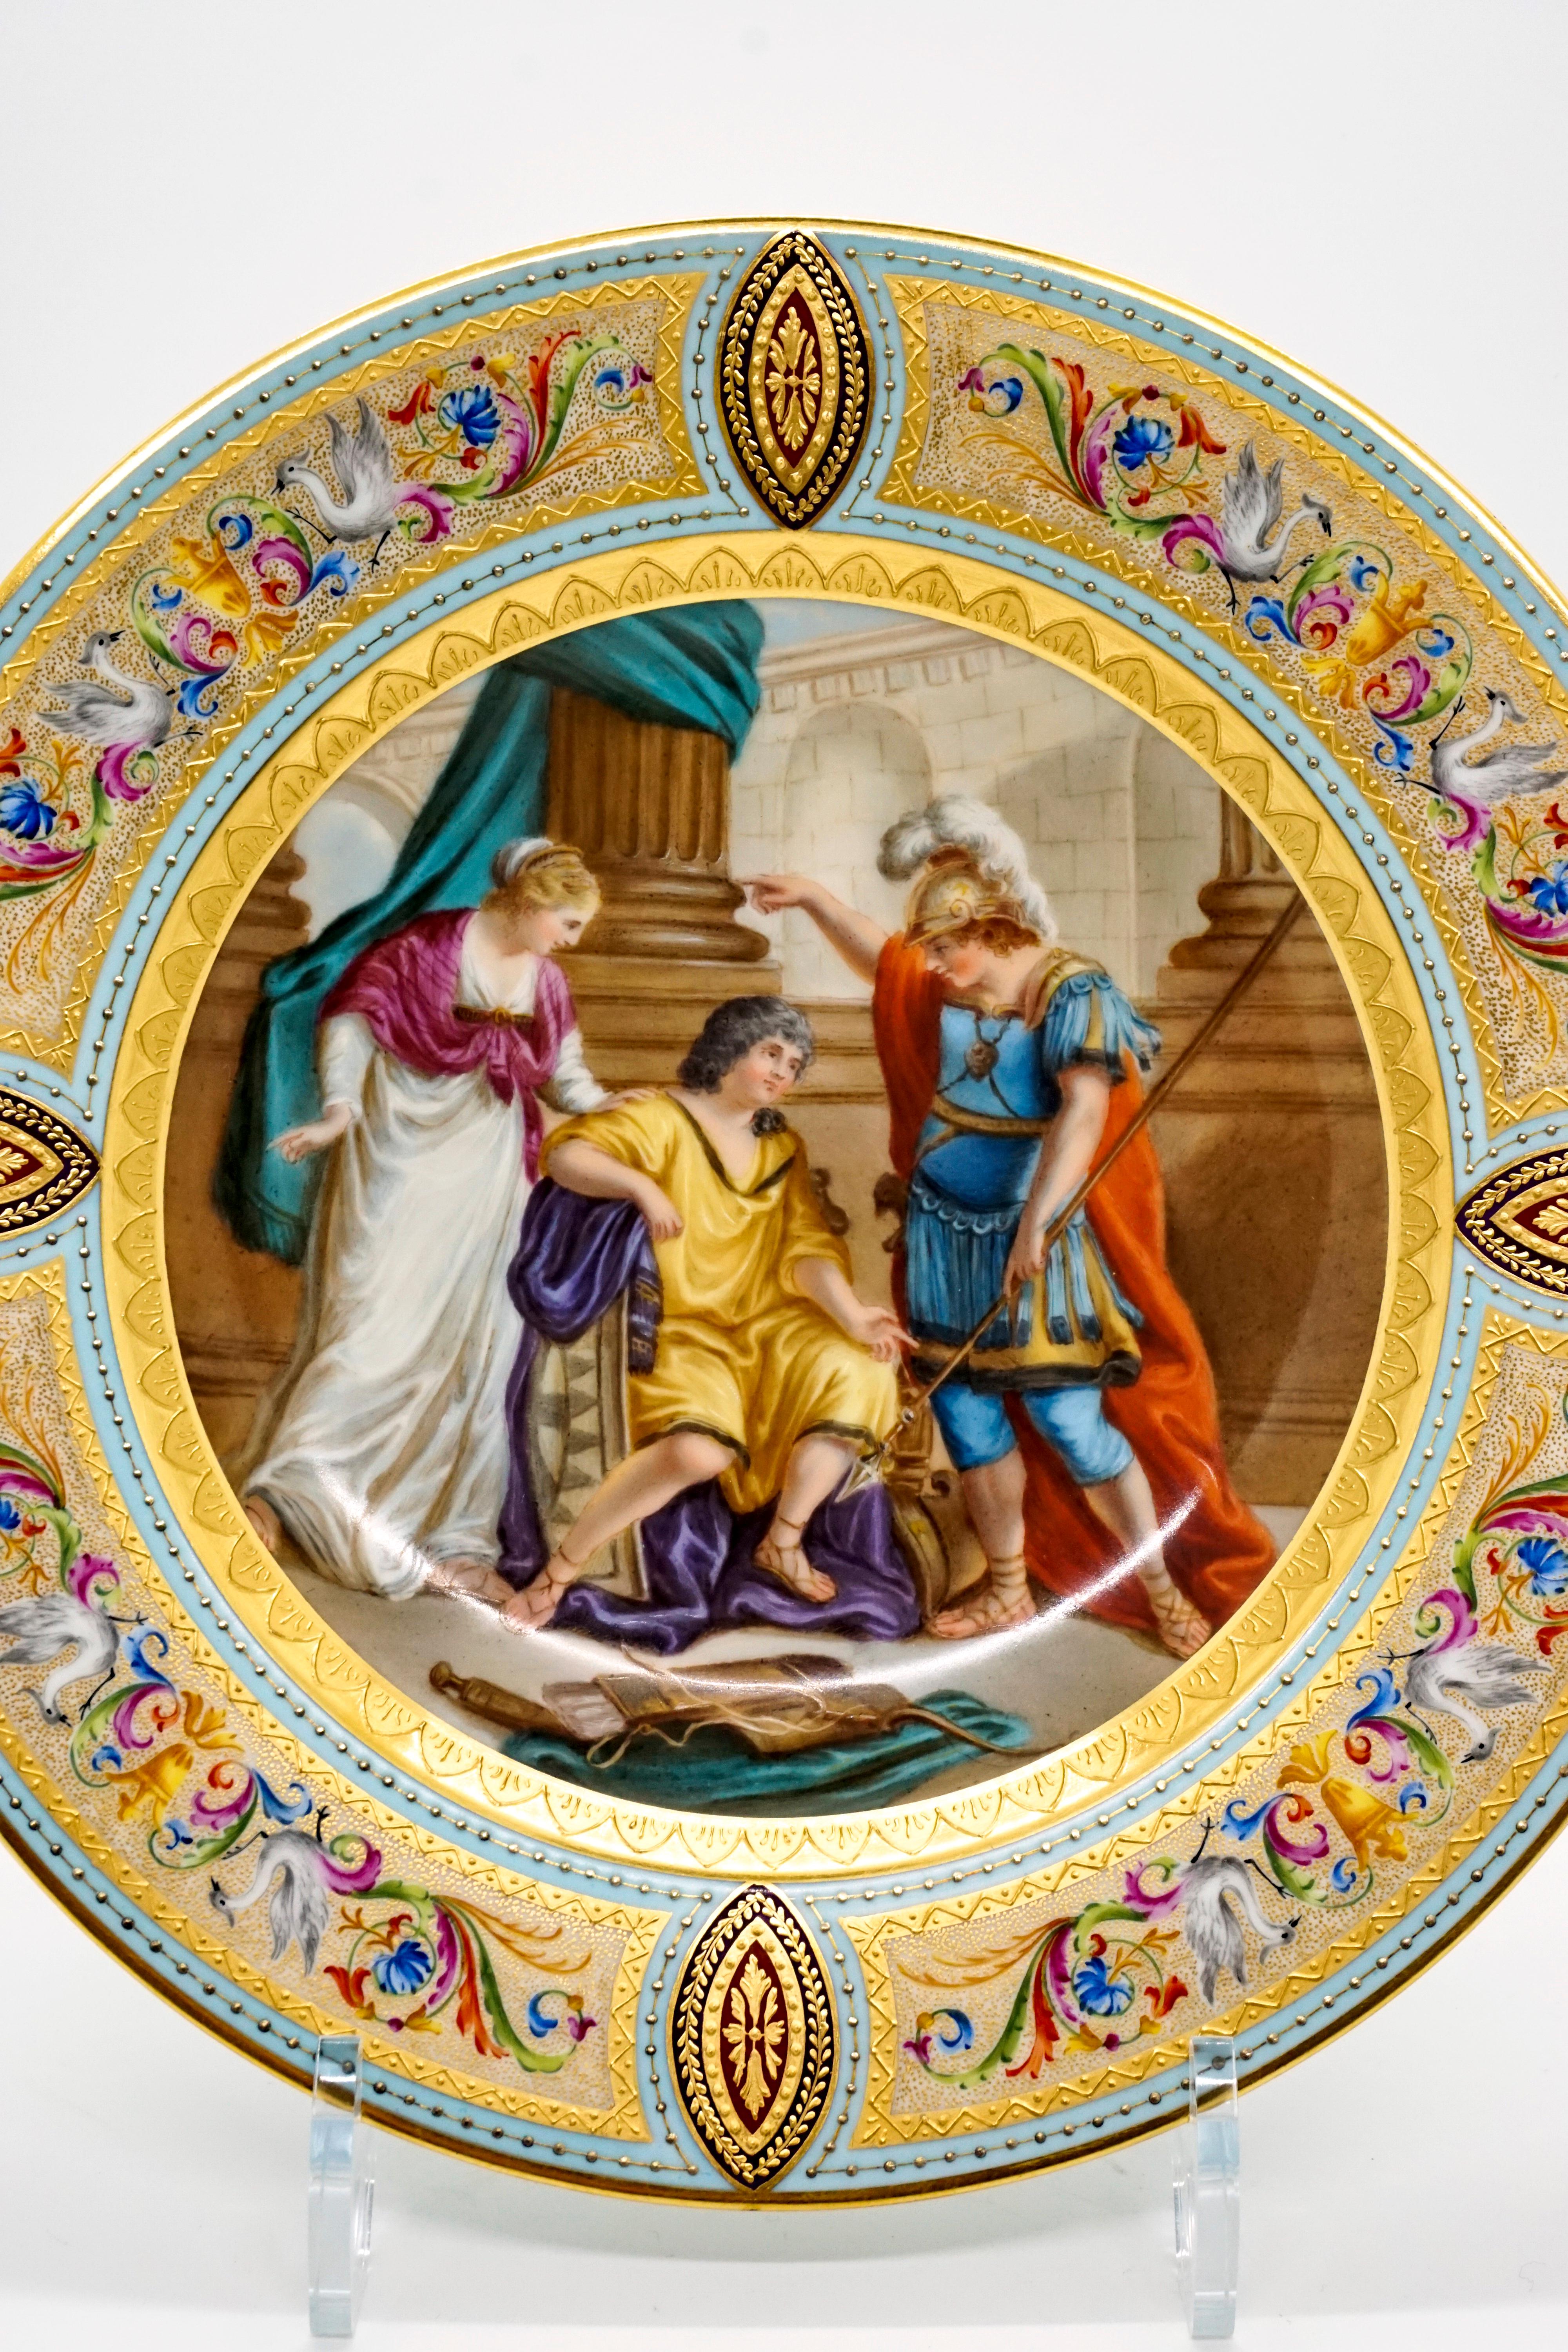 Elaborately painted porcelain picture plate: gold rim on the outside, light blue flag with four large reserves with pastose decorated gold frame and with a white, gold-dotted background, filled with polychrome feather tendrils and two herons painted